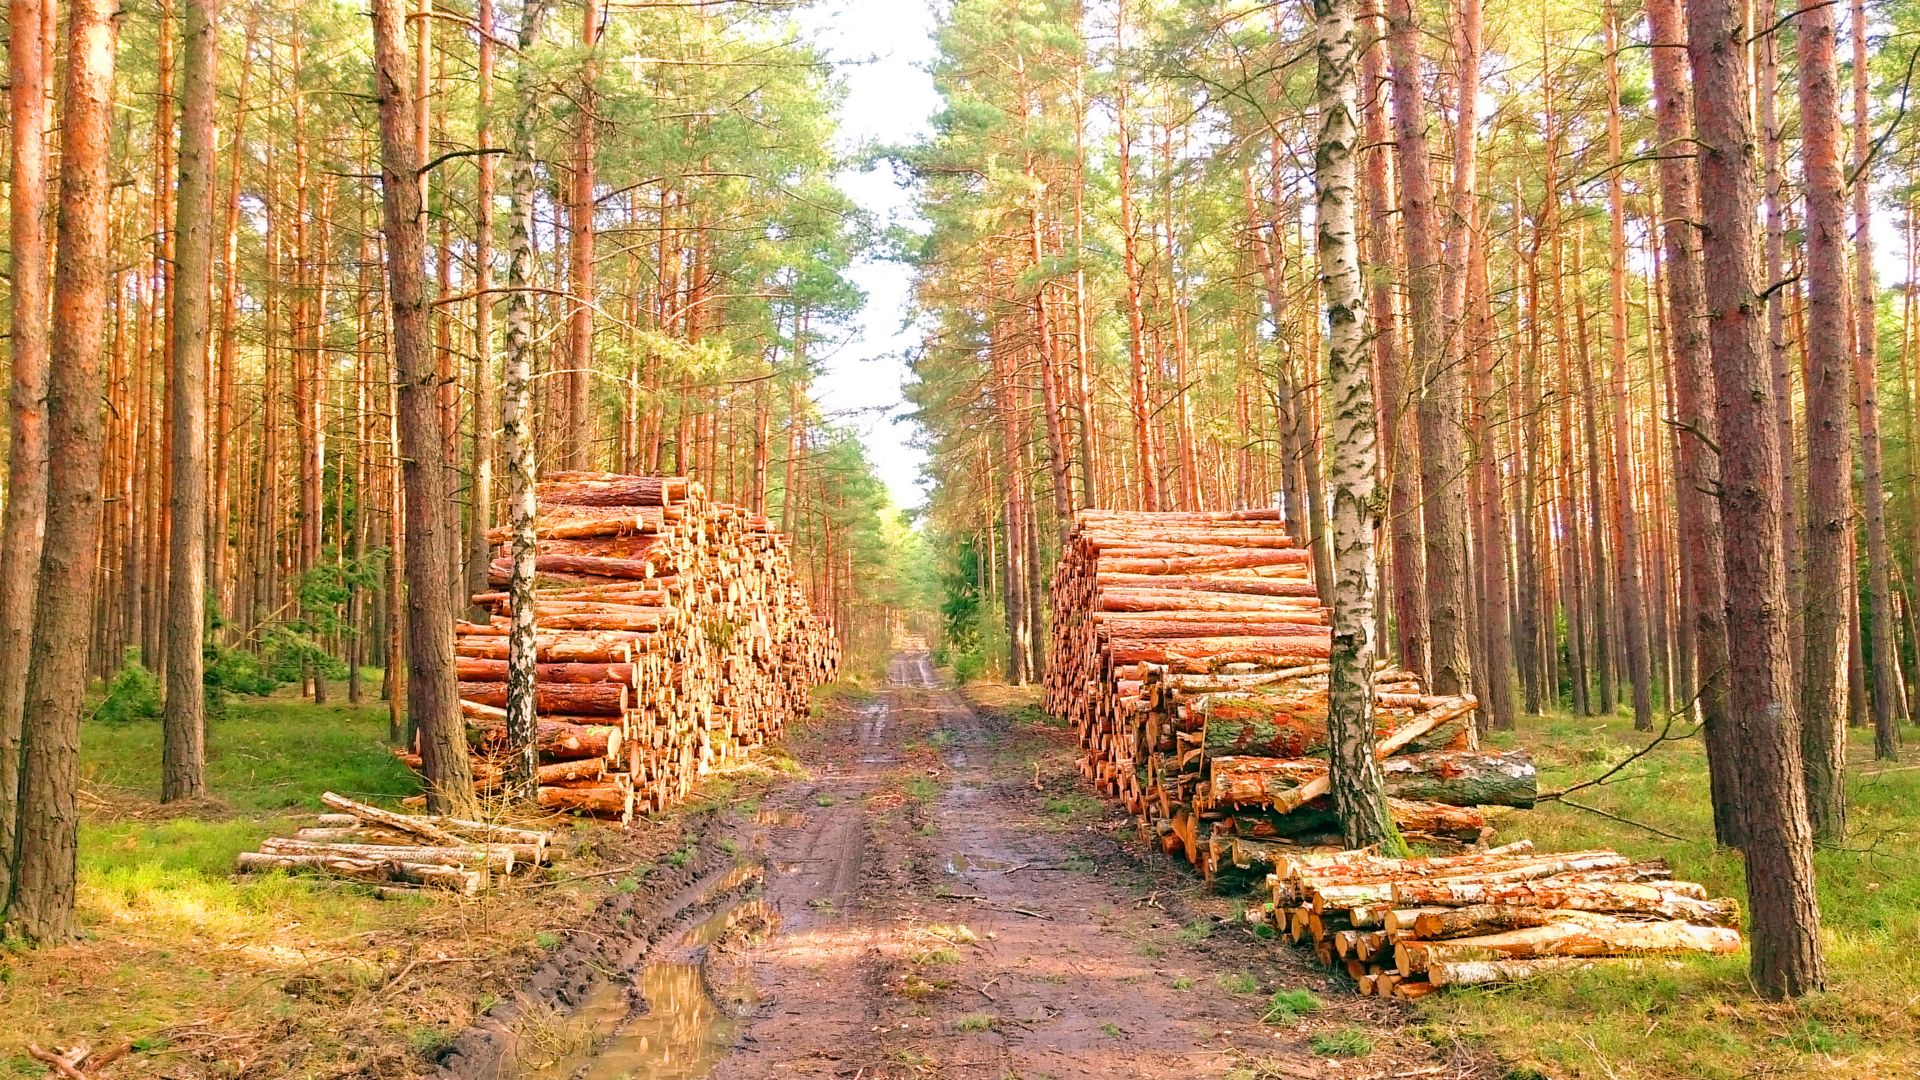 Stack a logs in pine forest. Timber and Firewood as a renewable energy source. Heavy industry. Fuel and power generation. Renewable energy and sustainable development theme.